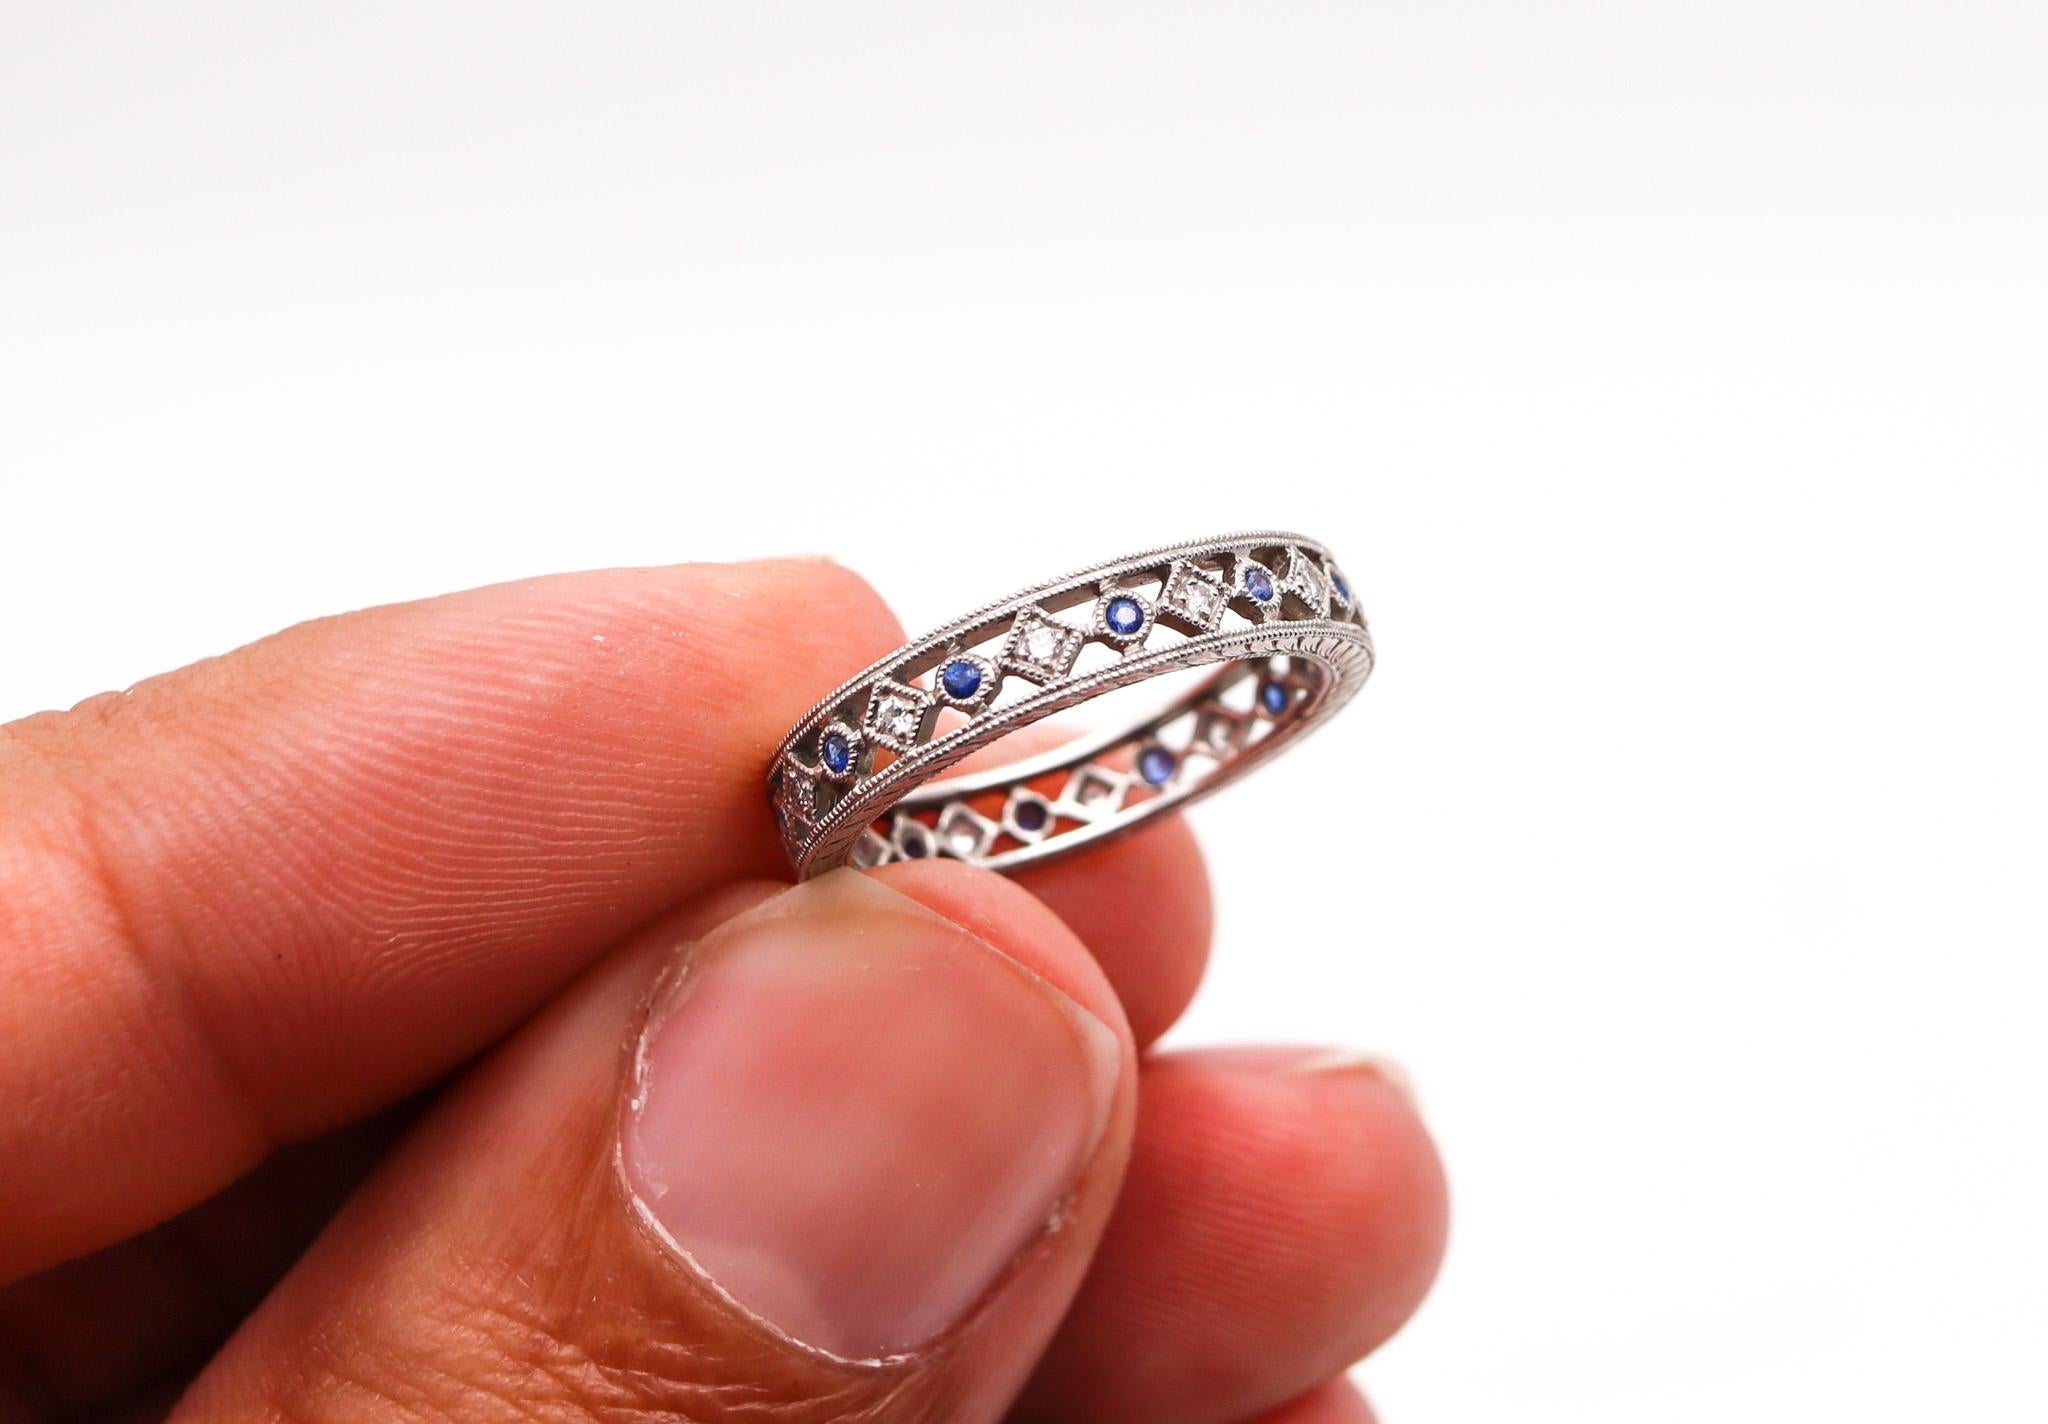 Neo Classic Eternity Ring in Platinum with Diamonds and Blue Sapphires In Excellent Condition For Sale In Miami, FL